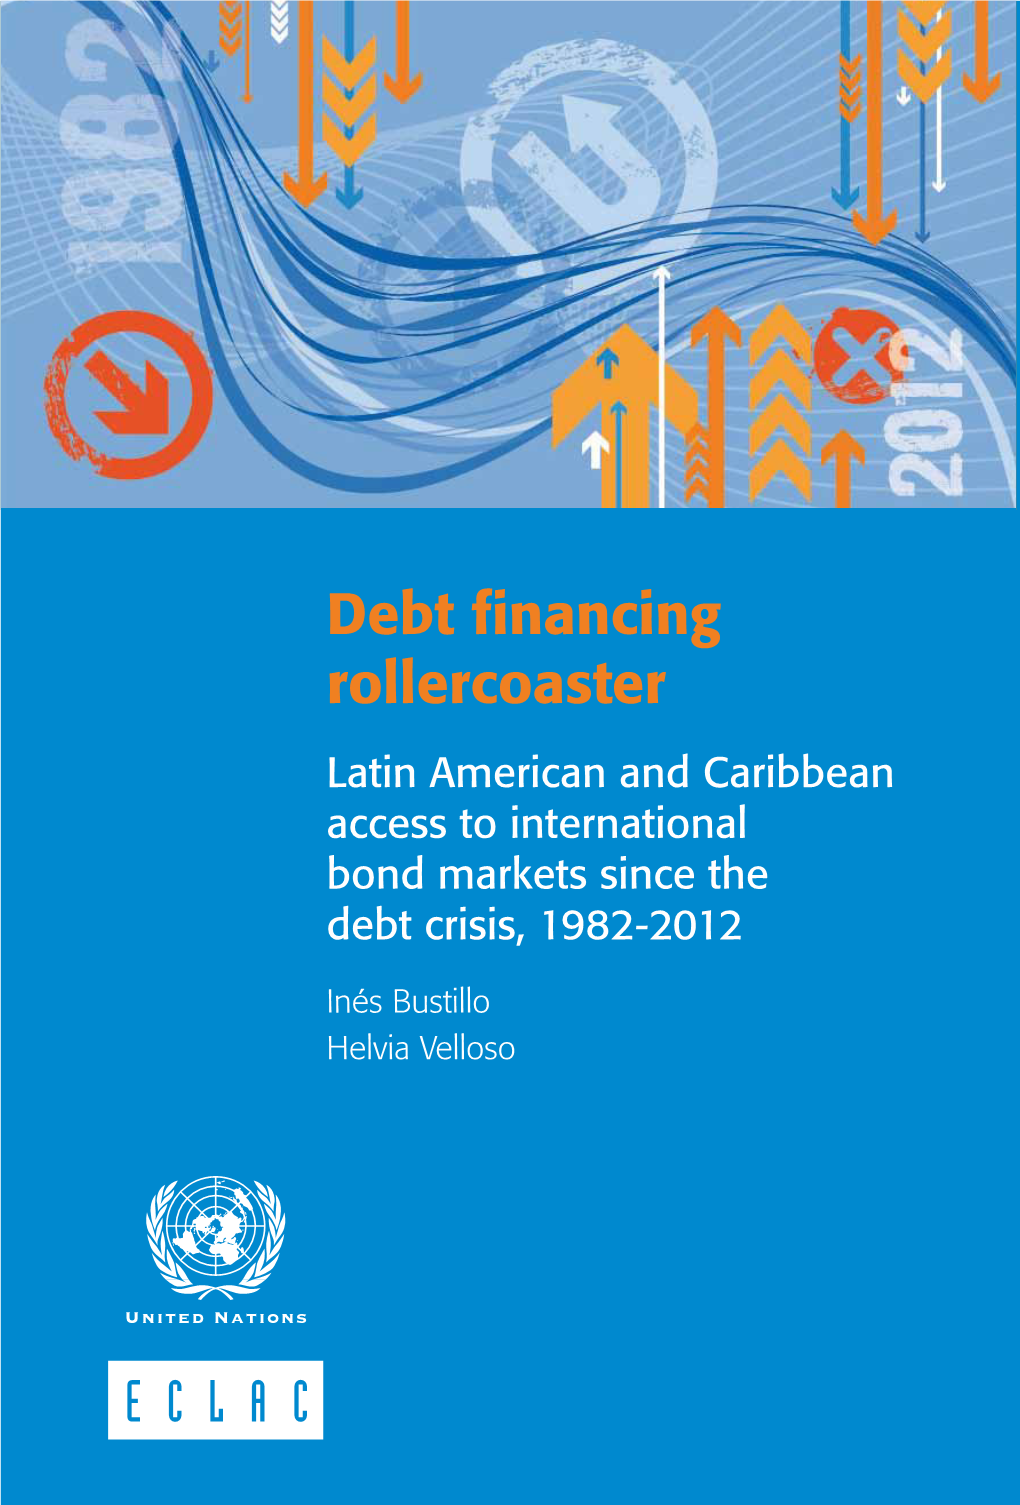 Debt Financing Rollercoaster Latin American and Caribbean Access to International Bond Markets Since the Debt Crisis, 1982-2012